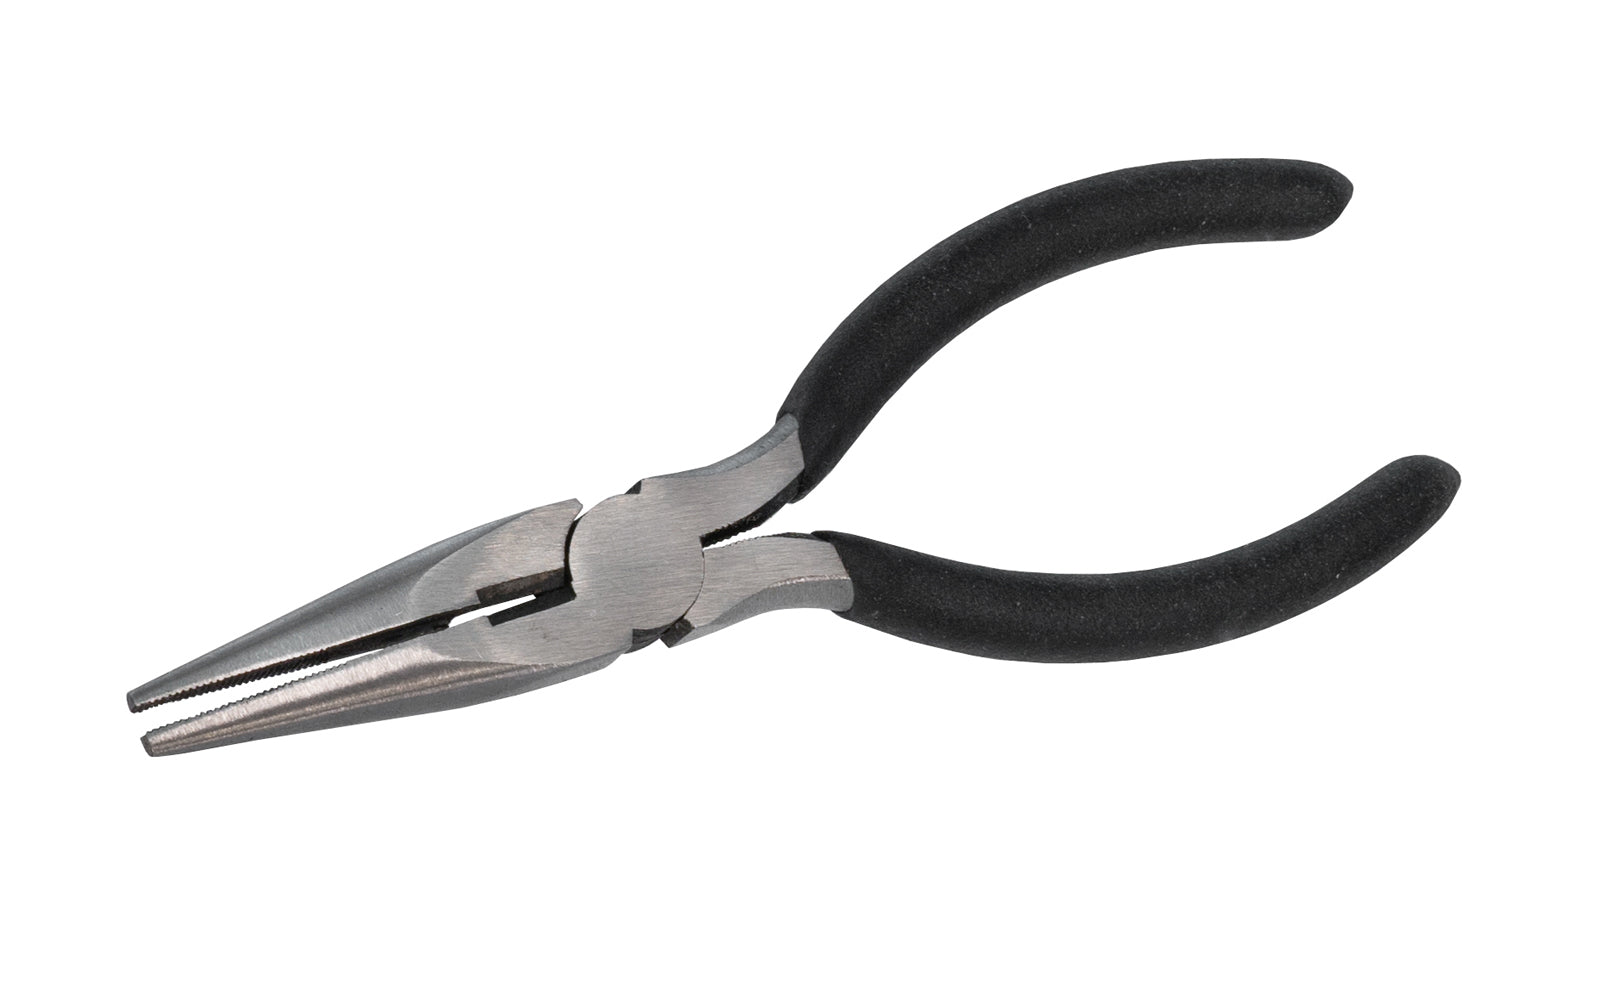 6" Diagonal Cutting Pliers. Drop forged heat treated steel. Cushioned non-slip handle grips. 761605100761. Wisdom Tools